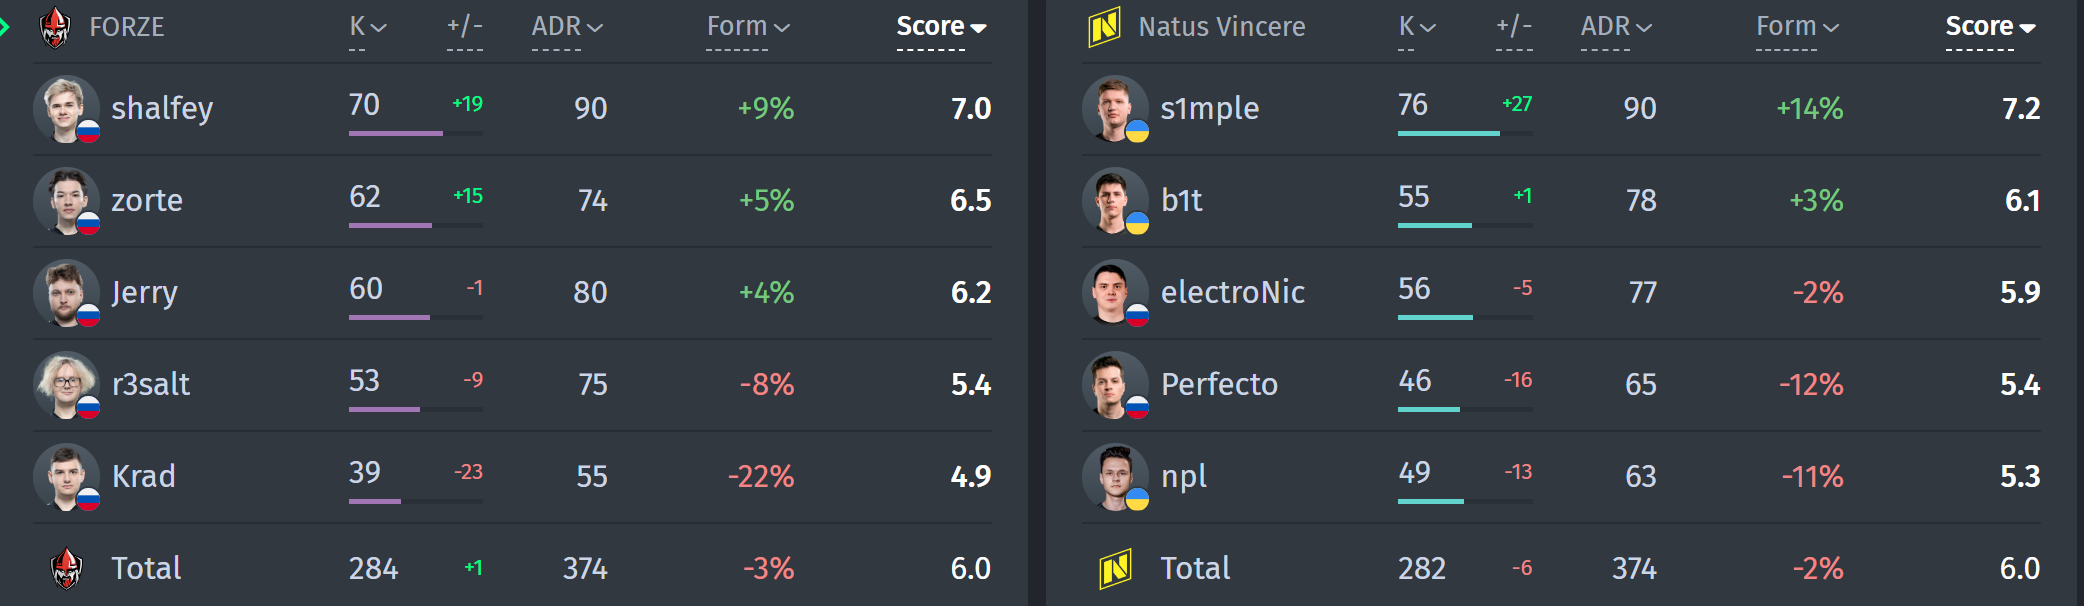 Player statistics in the match Natus Vincere — FORZE